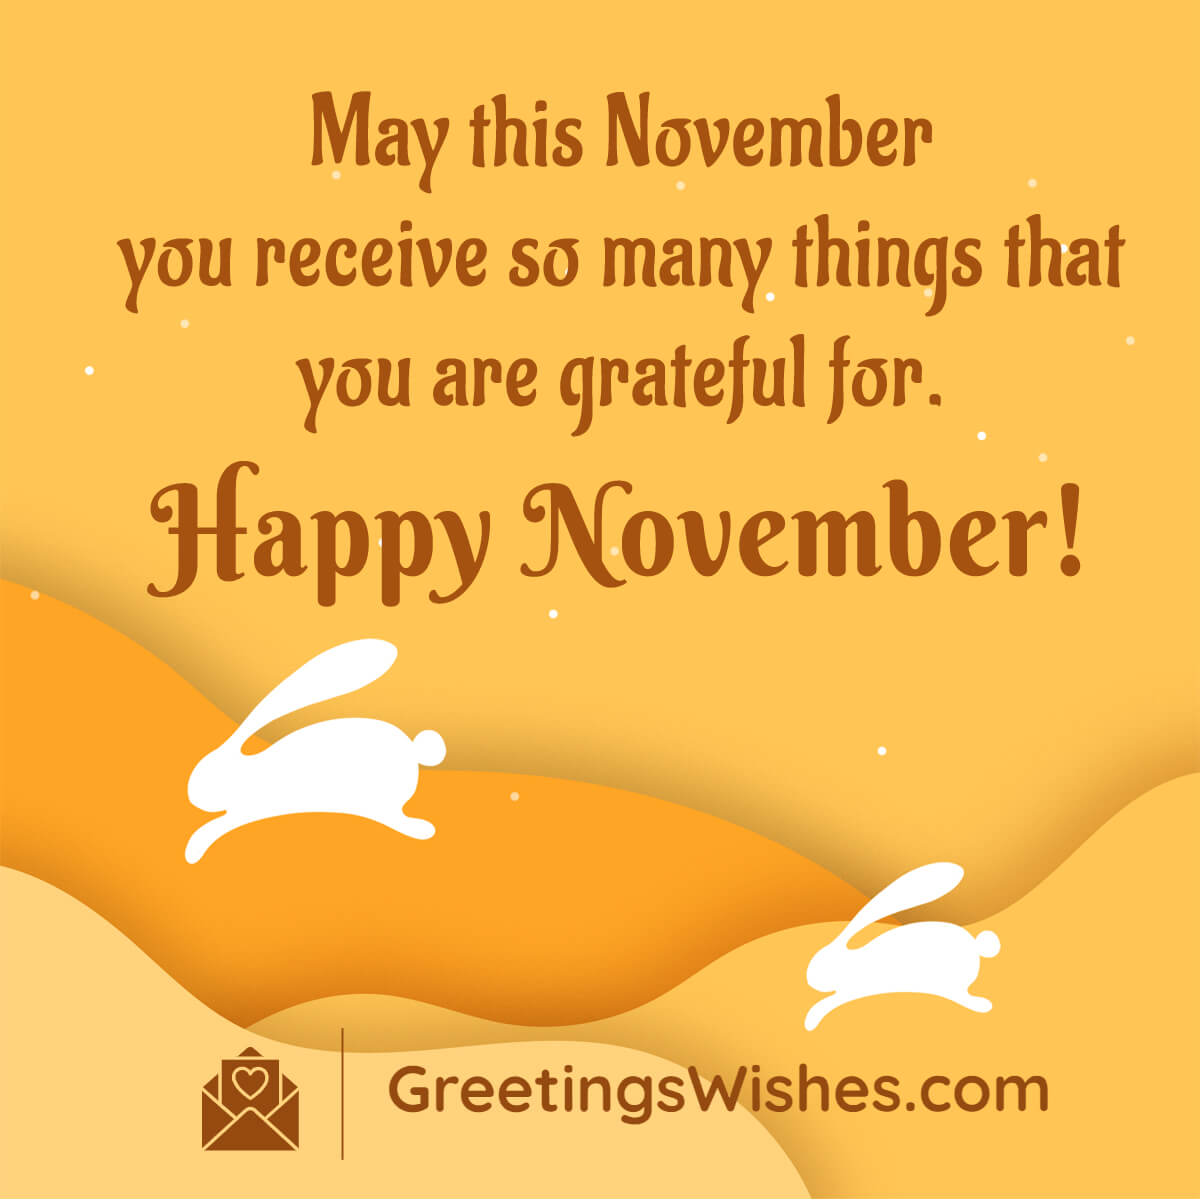 Happy November Month Wishes - Greetings Wishes